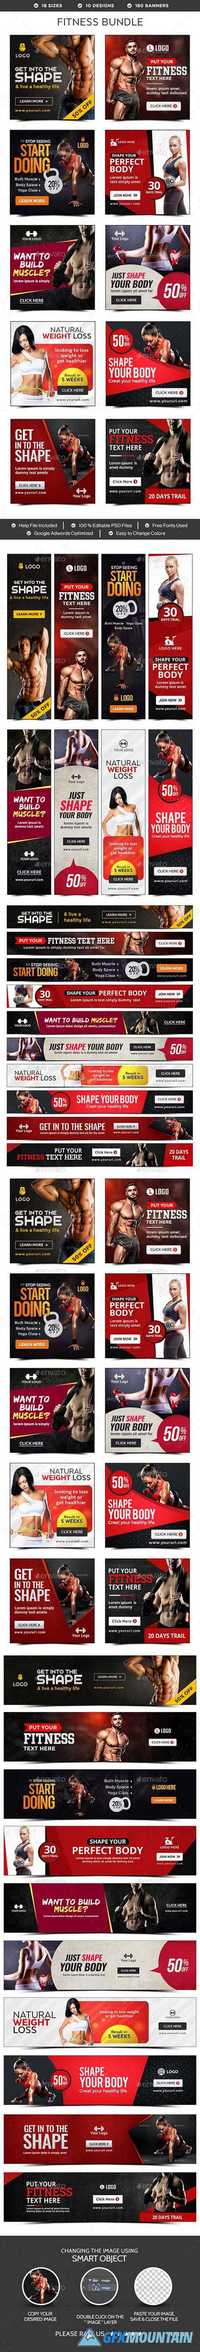 Graphicriver Fitness Banners Bundle - 10 Sets - 180 Banners 19460040